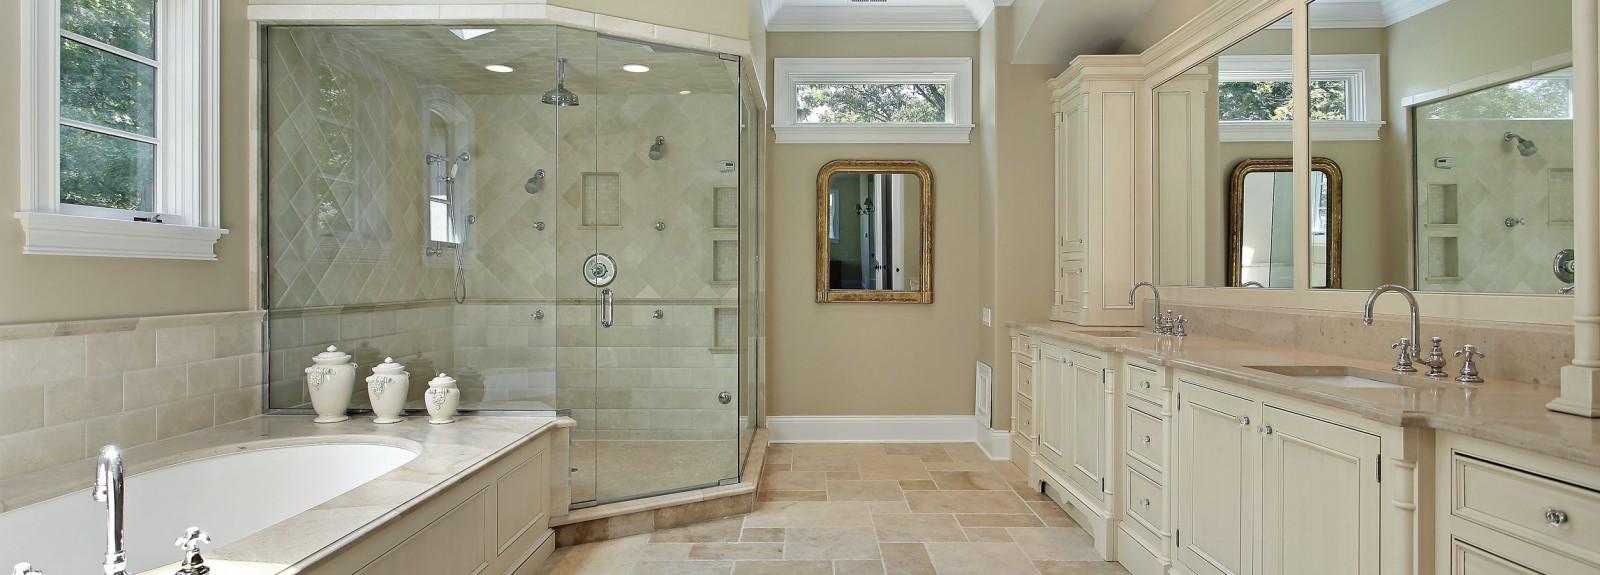 We can design and deliver this kind of spacious full gorgeous bathroom…